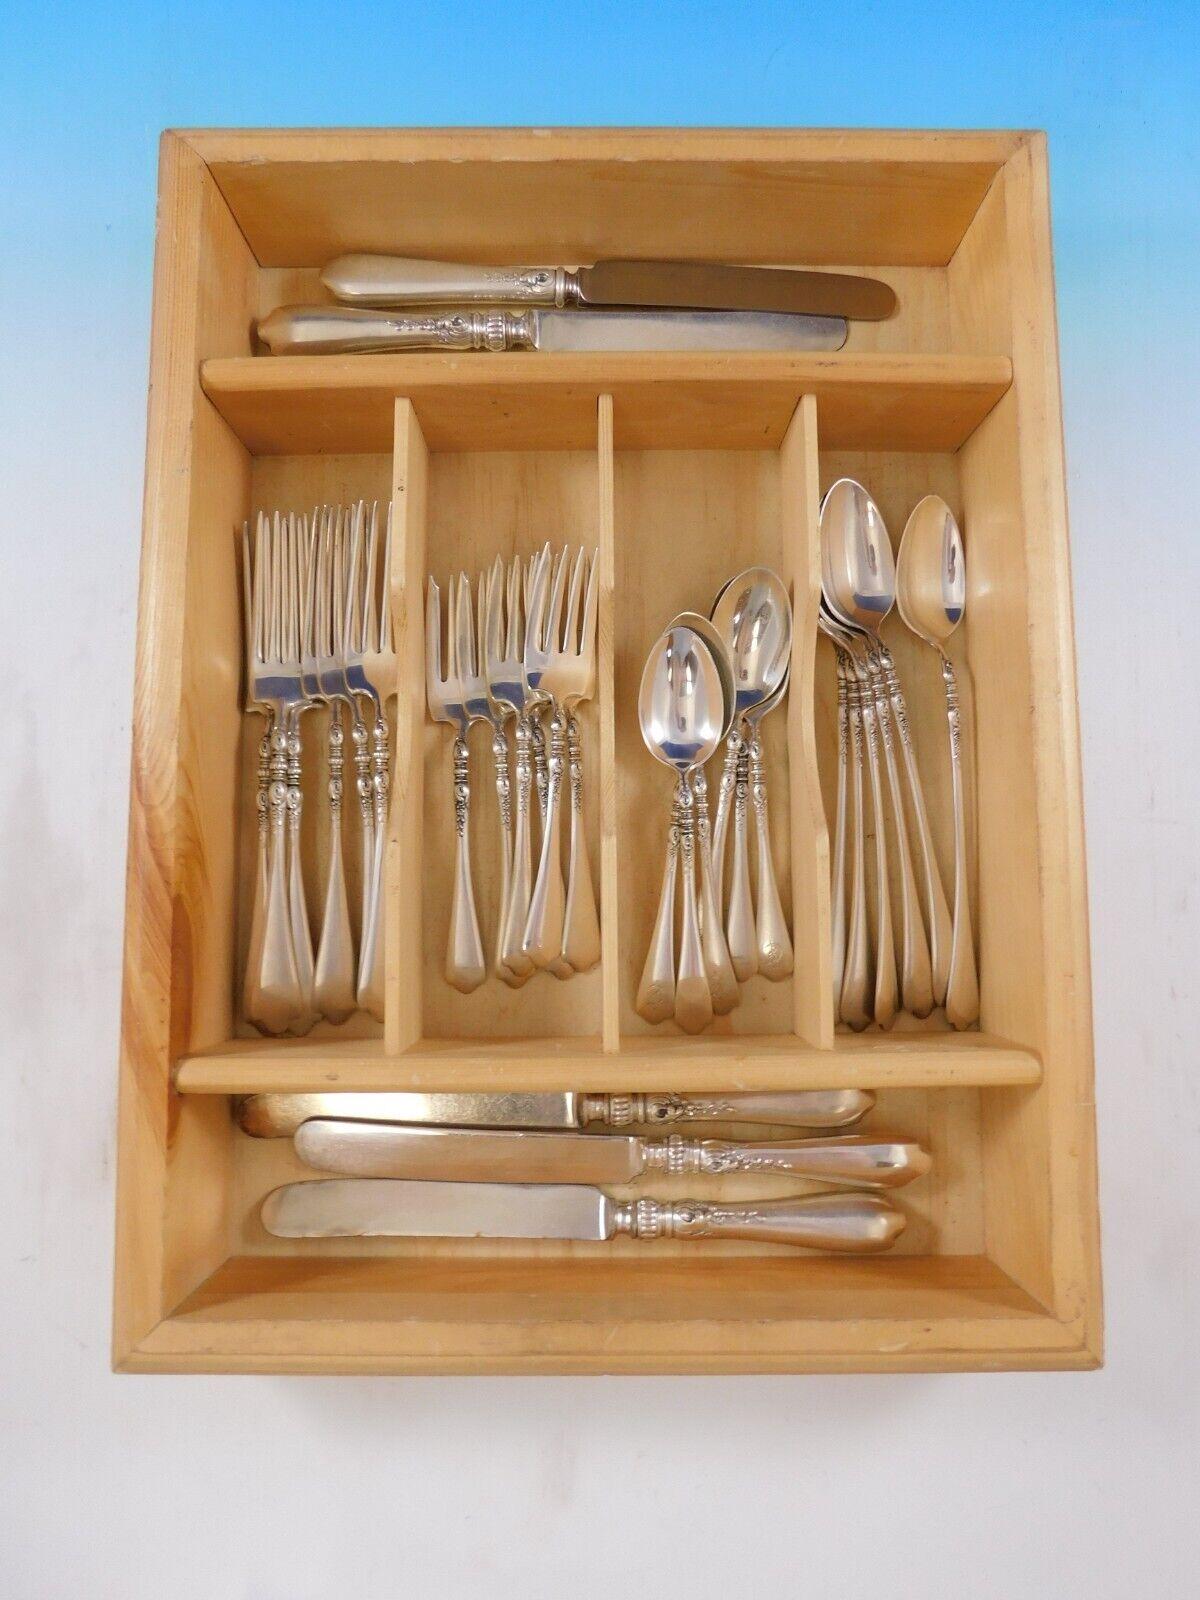 Nellie Custis by Lunt sterling silver Flatware set, 30 pieces. Great starter set! This set includes:

6 knives, fancy handles with extra design, 8 3/4